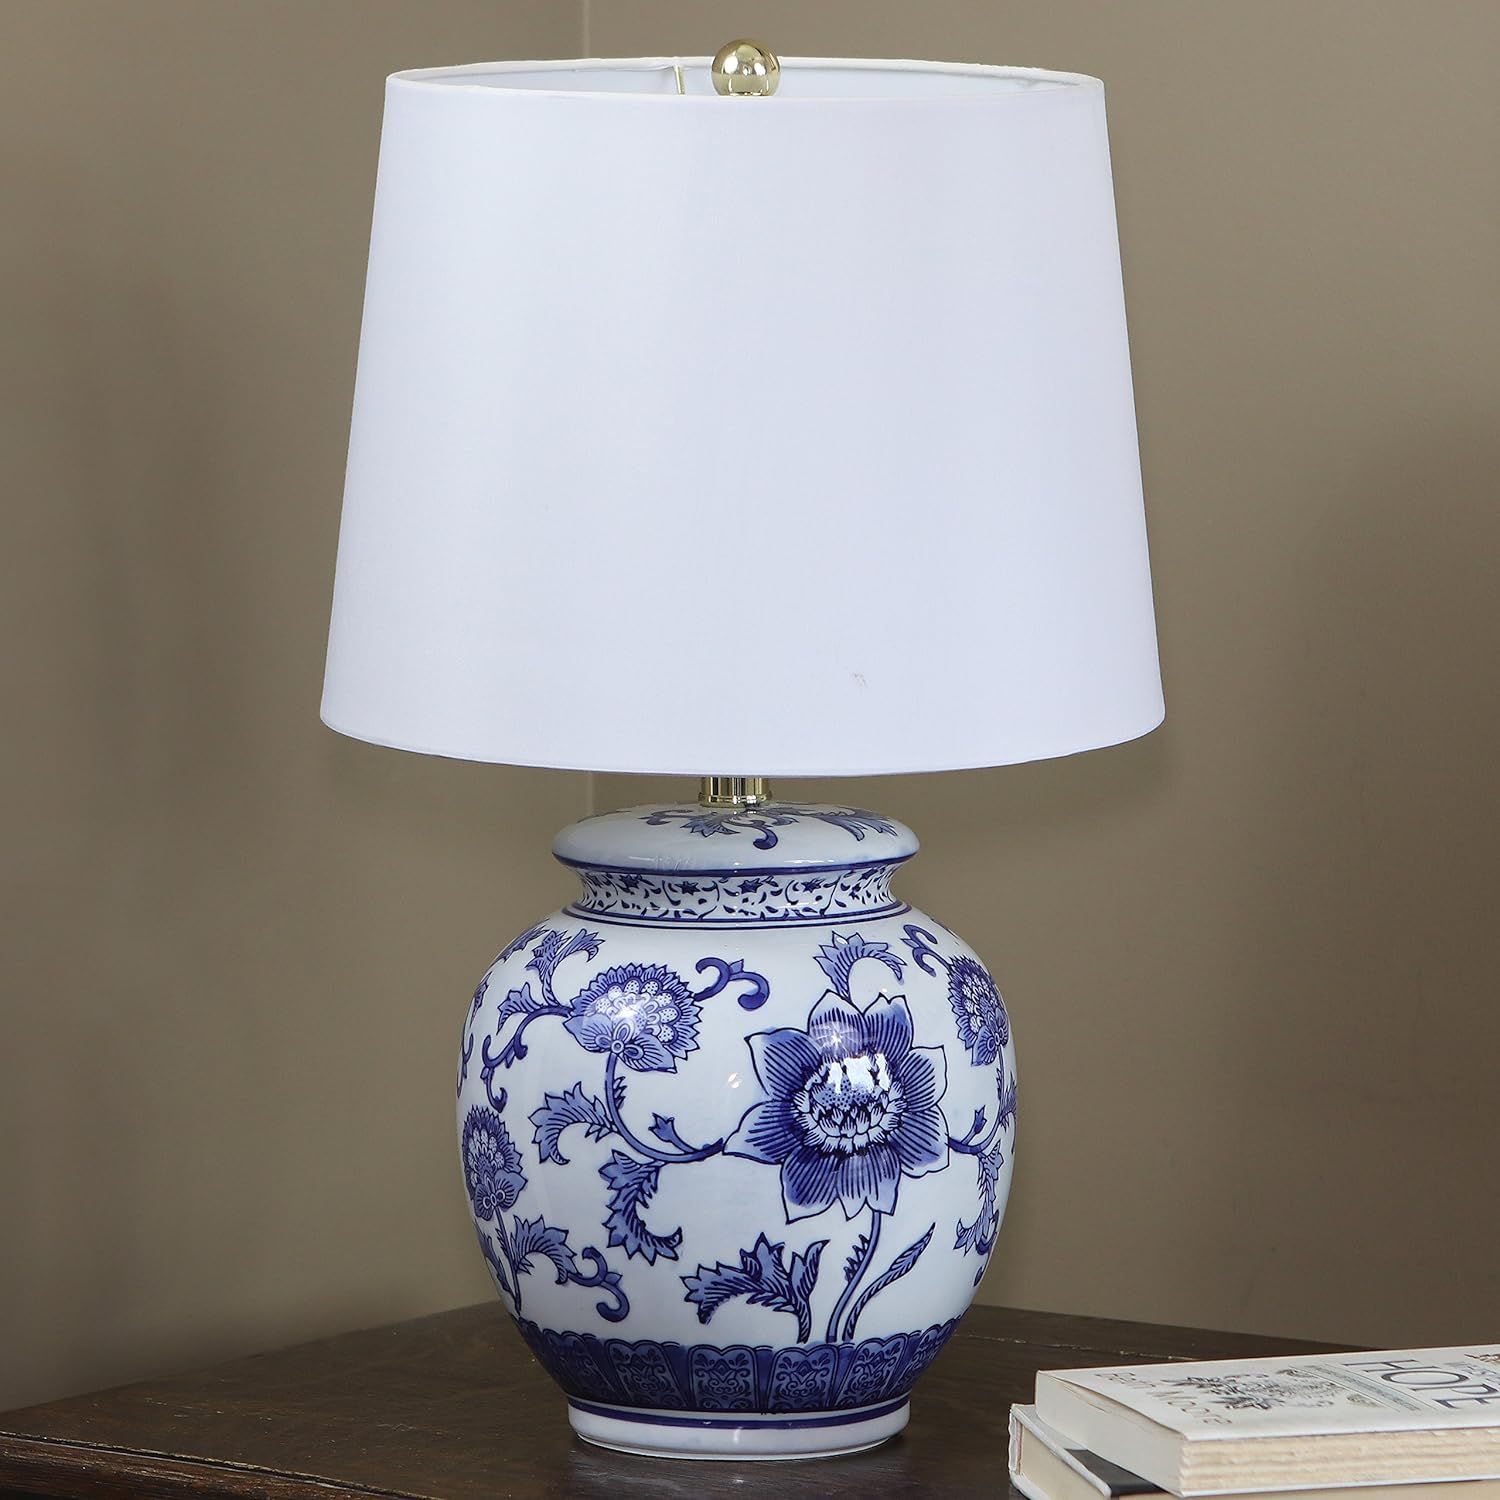 Décor Therapy TL14119 Blue and White Ceramic Table Lamp | Amazon (US)